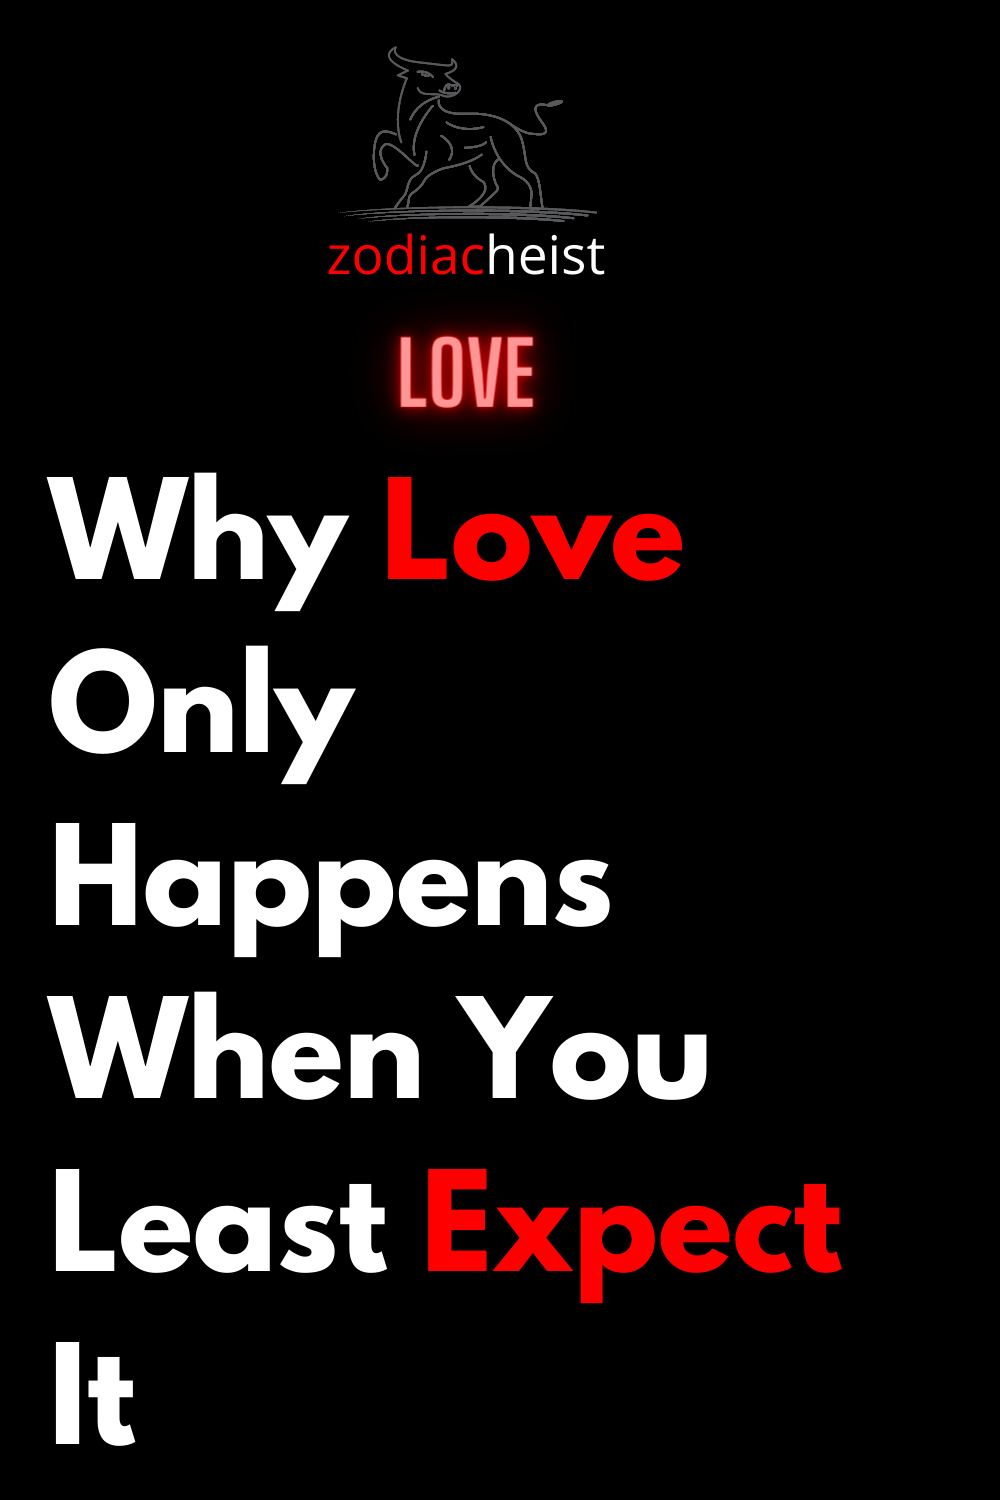 Why Love Only Happens When You Least Expect It